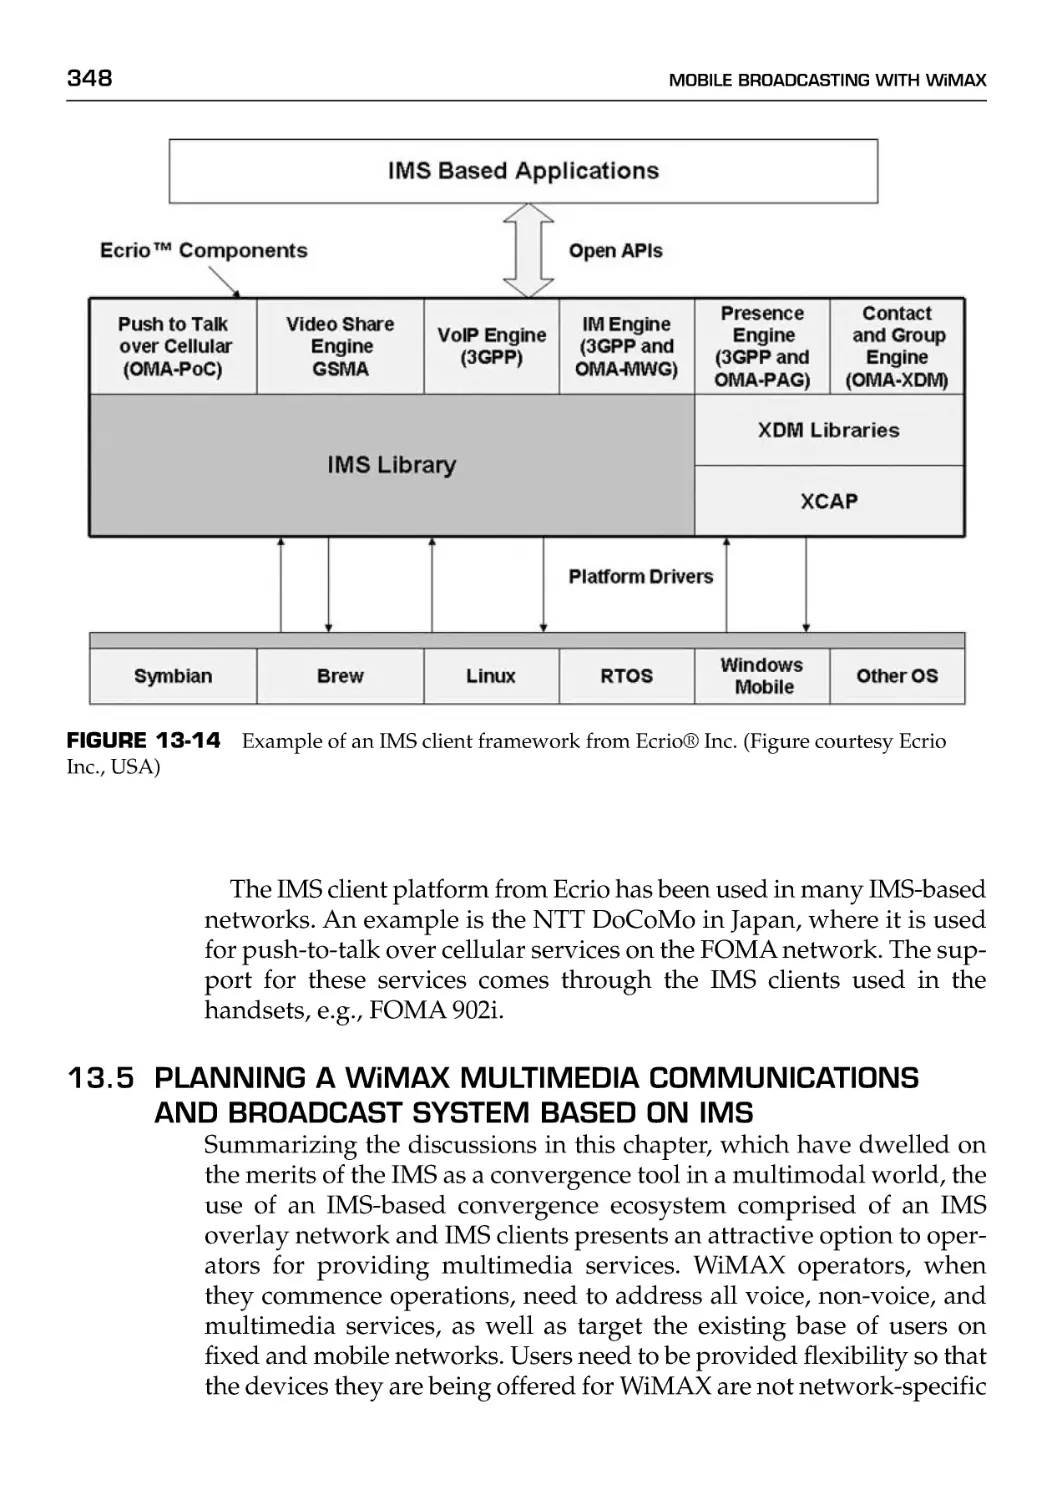 13.5 Planning a WiMAX Multimedia Communications and Broadcast System Based on IMS